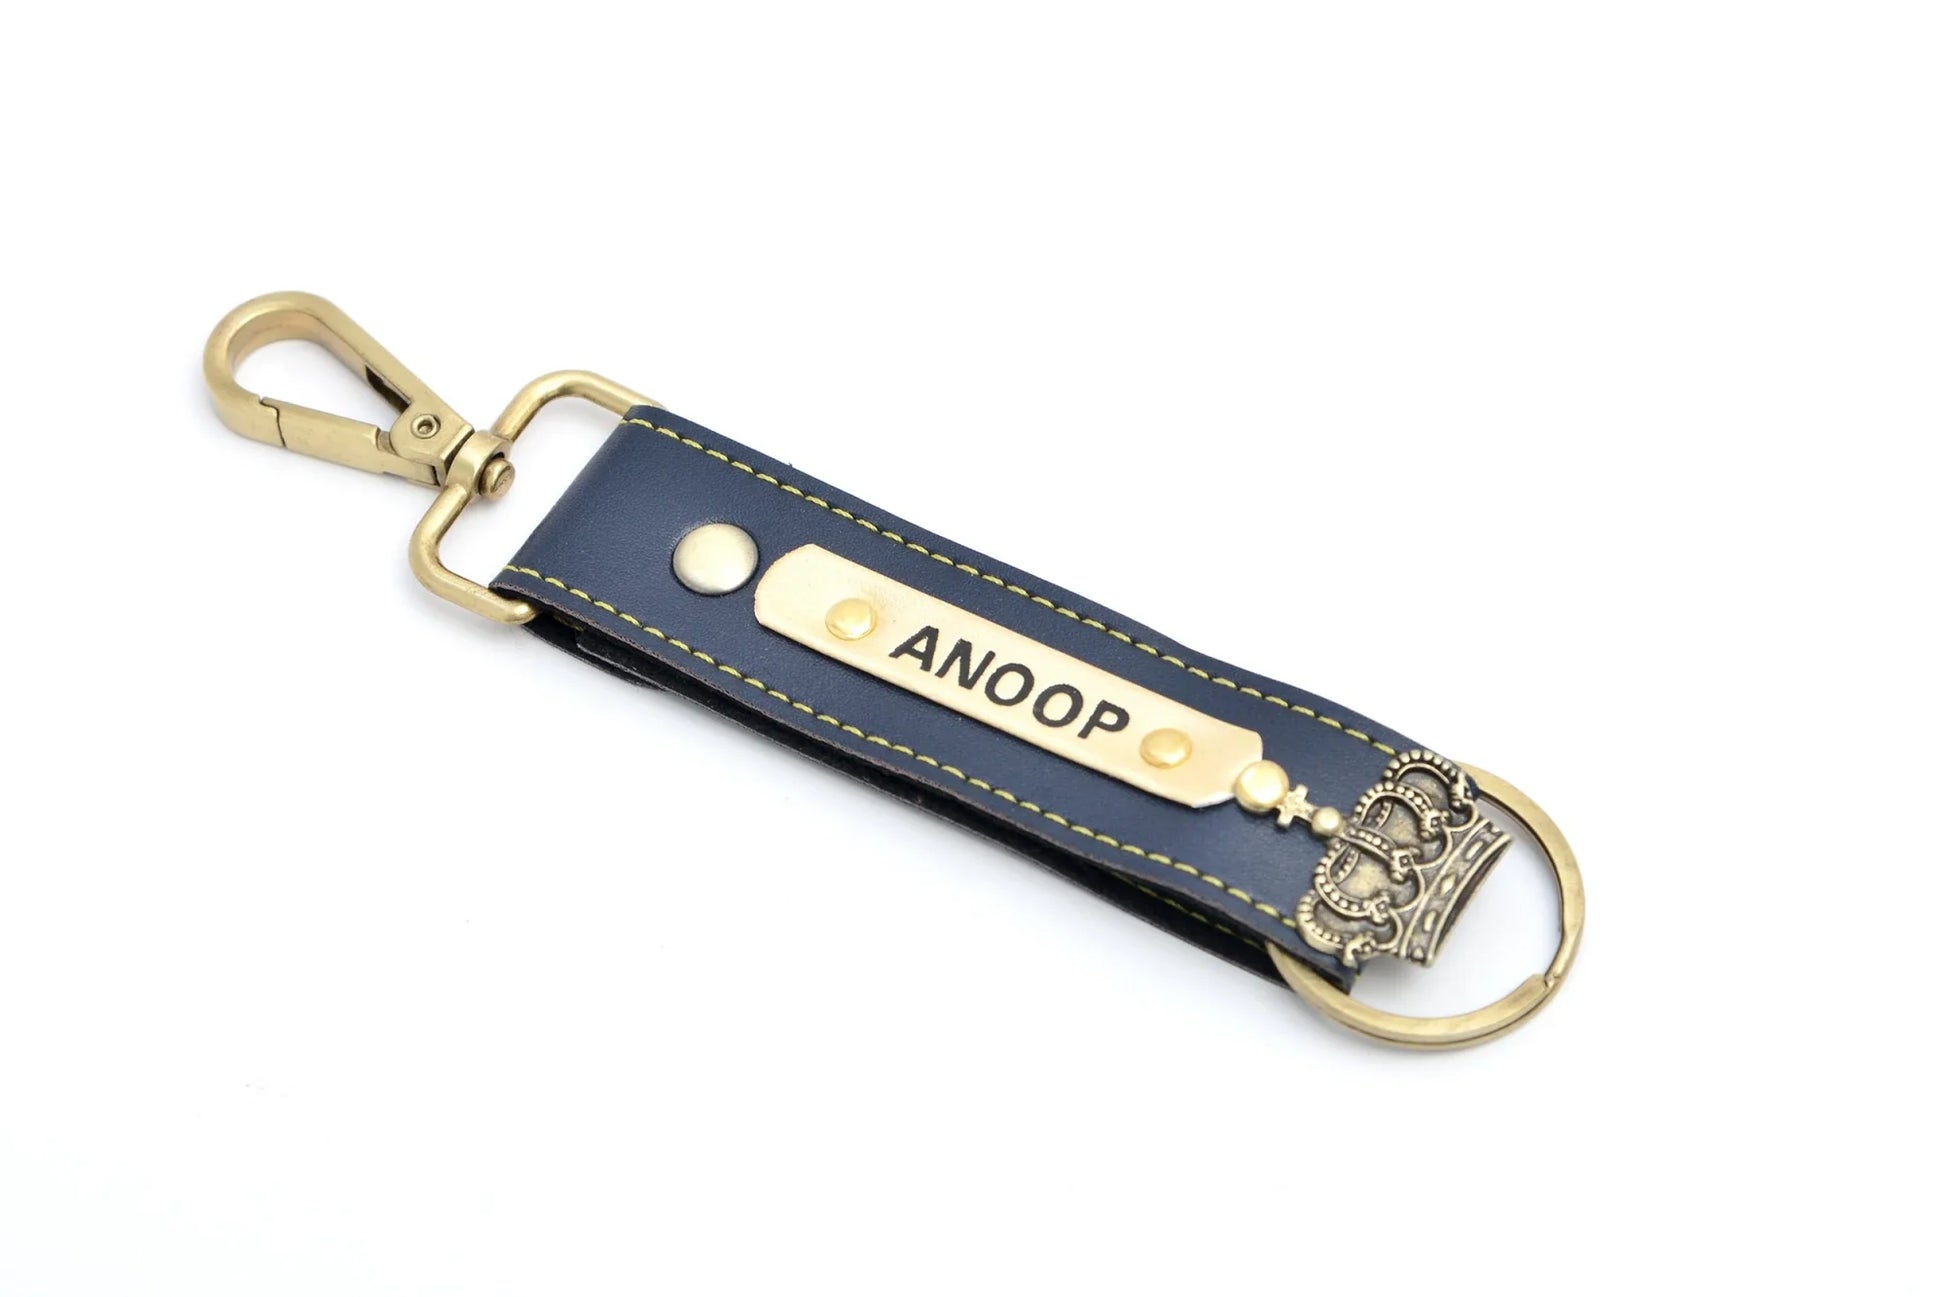 Keep your keys intact and in place with this amazing keychain that speaks style, class and utility